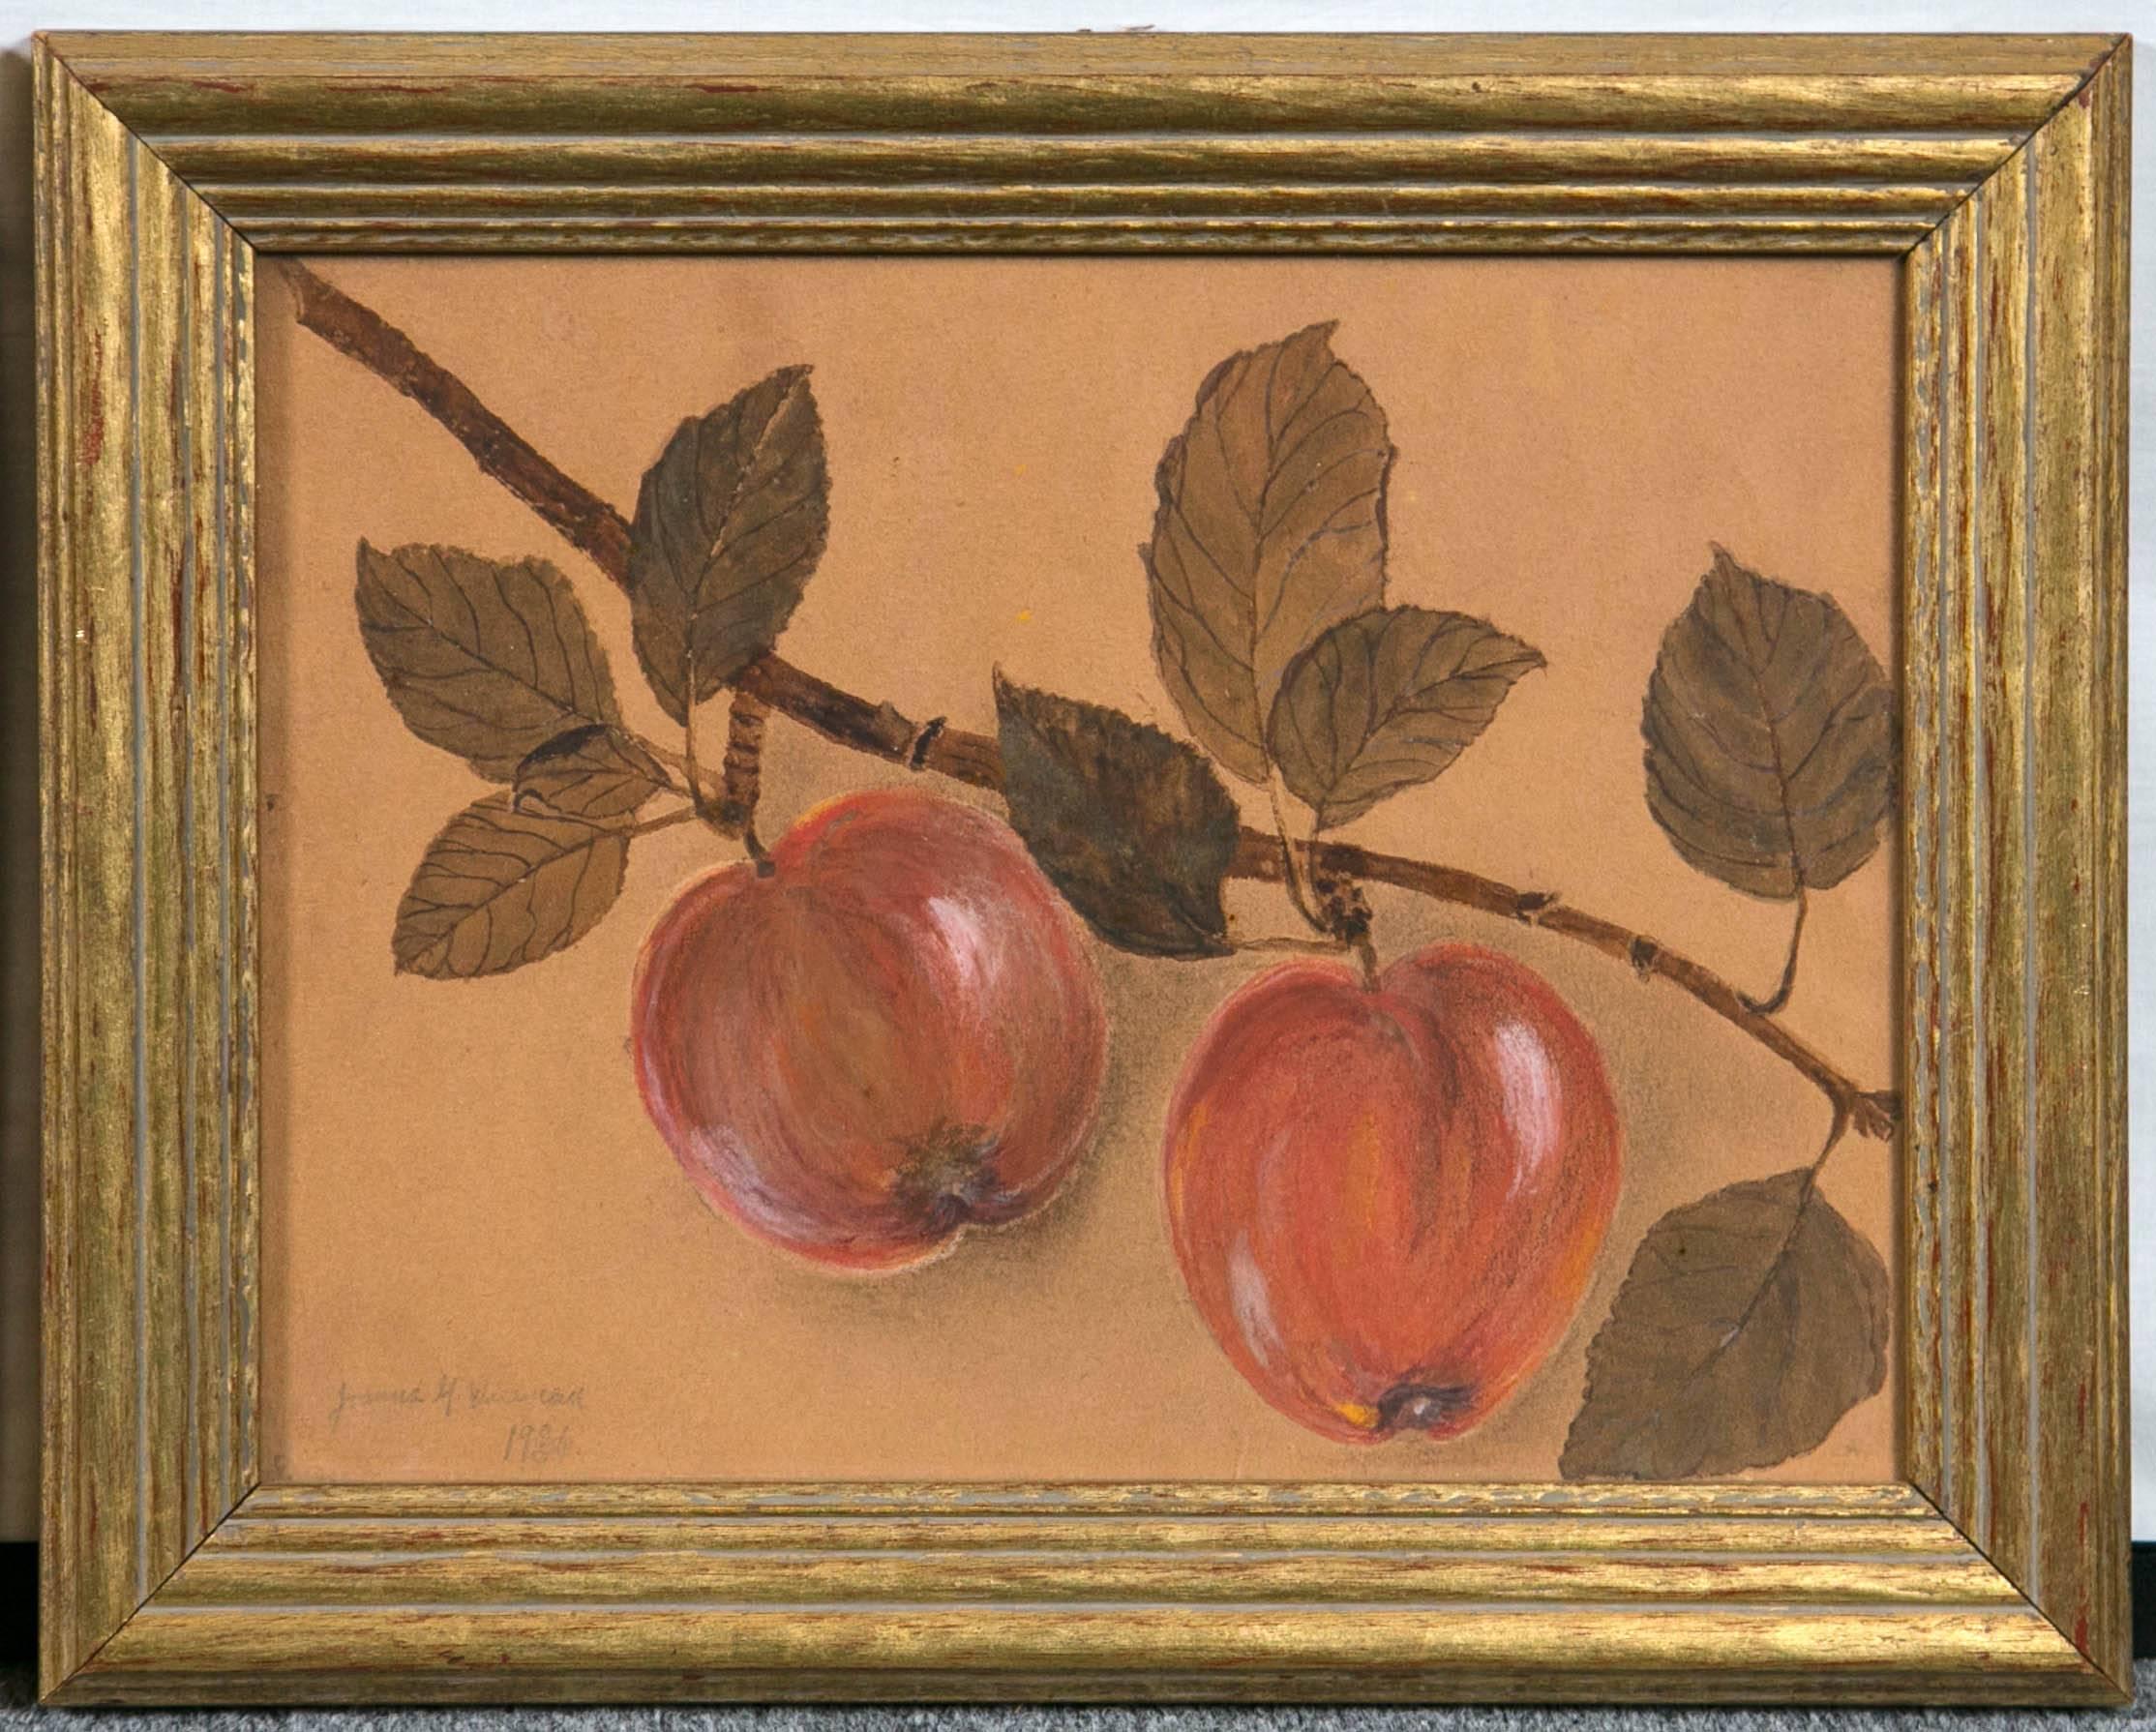 Pair of framed fruit paintings, circa 1930s. Charming gouache (opaque watercolor) studies of apple and pear fruit branches. Signed and dated, lower left. Custom giltwood frames by John M. Wiseman, Newport, Rhode Island.